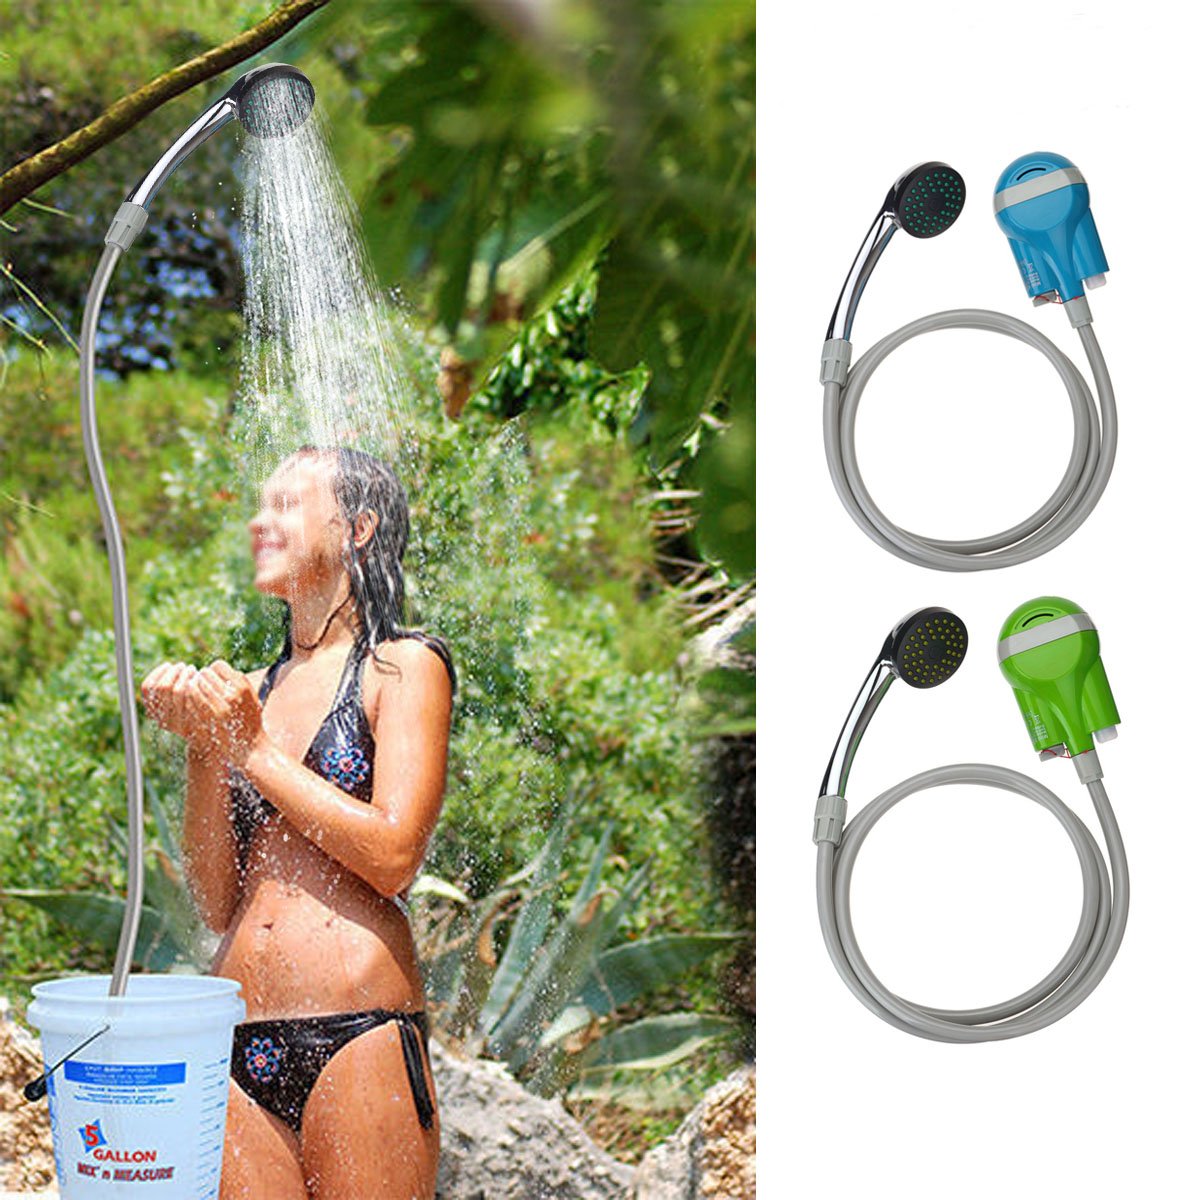 IPRee® Portable USB Shower Water Pump Rechargeable Nozzle Handheld Camp Travel Outdoor Kit 2